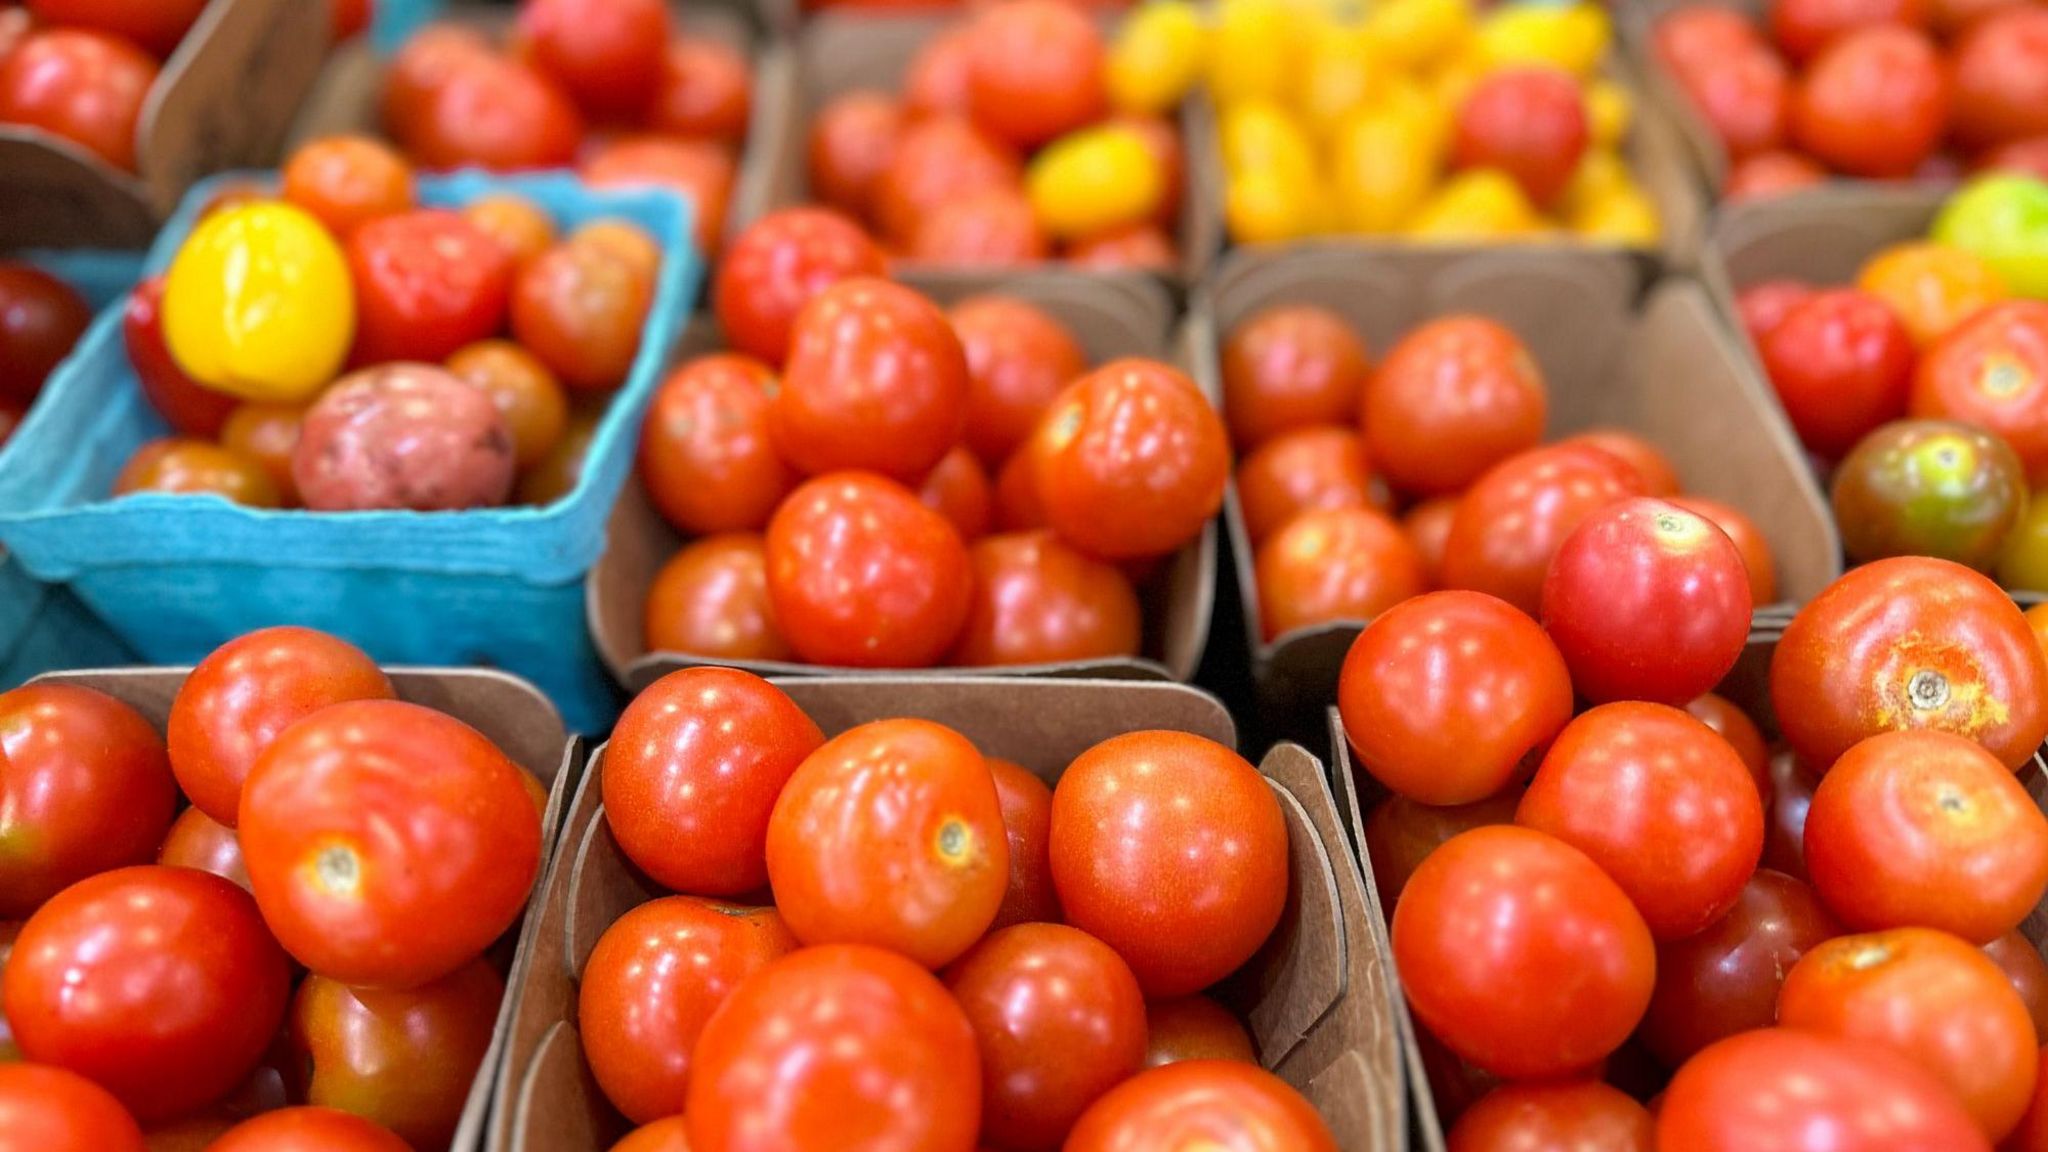 Close-up of tomatoes in a food shop